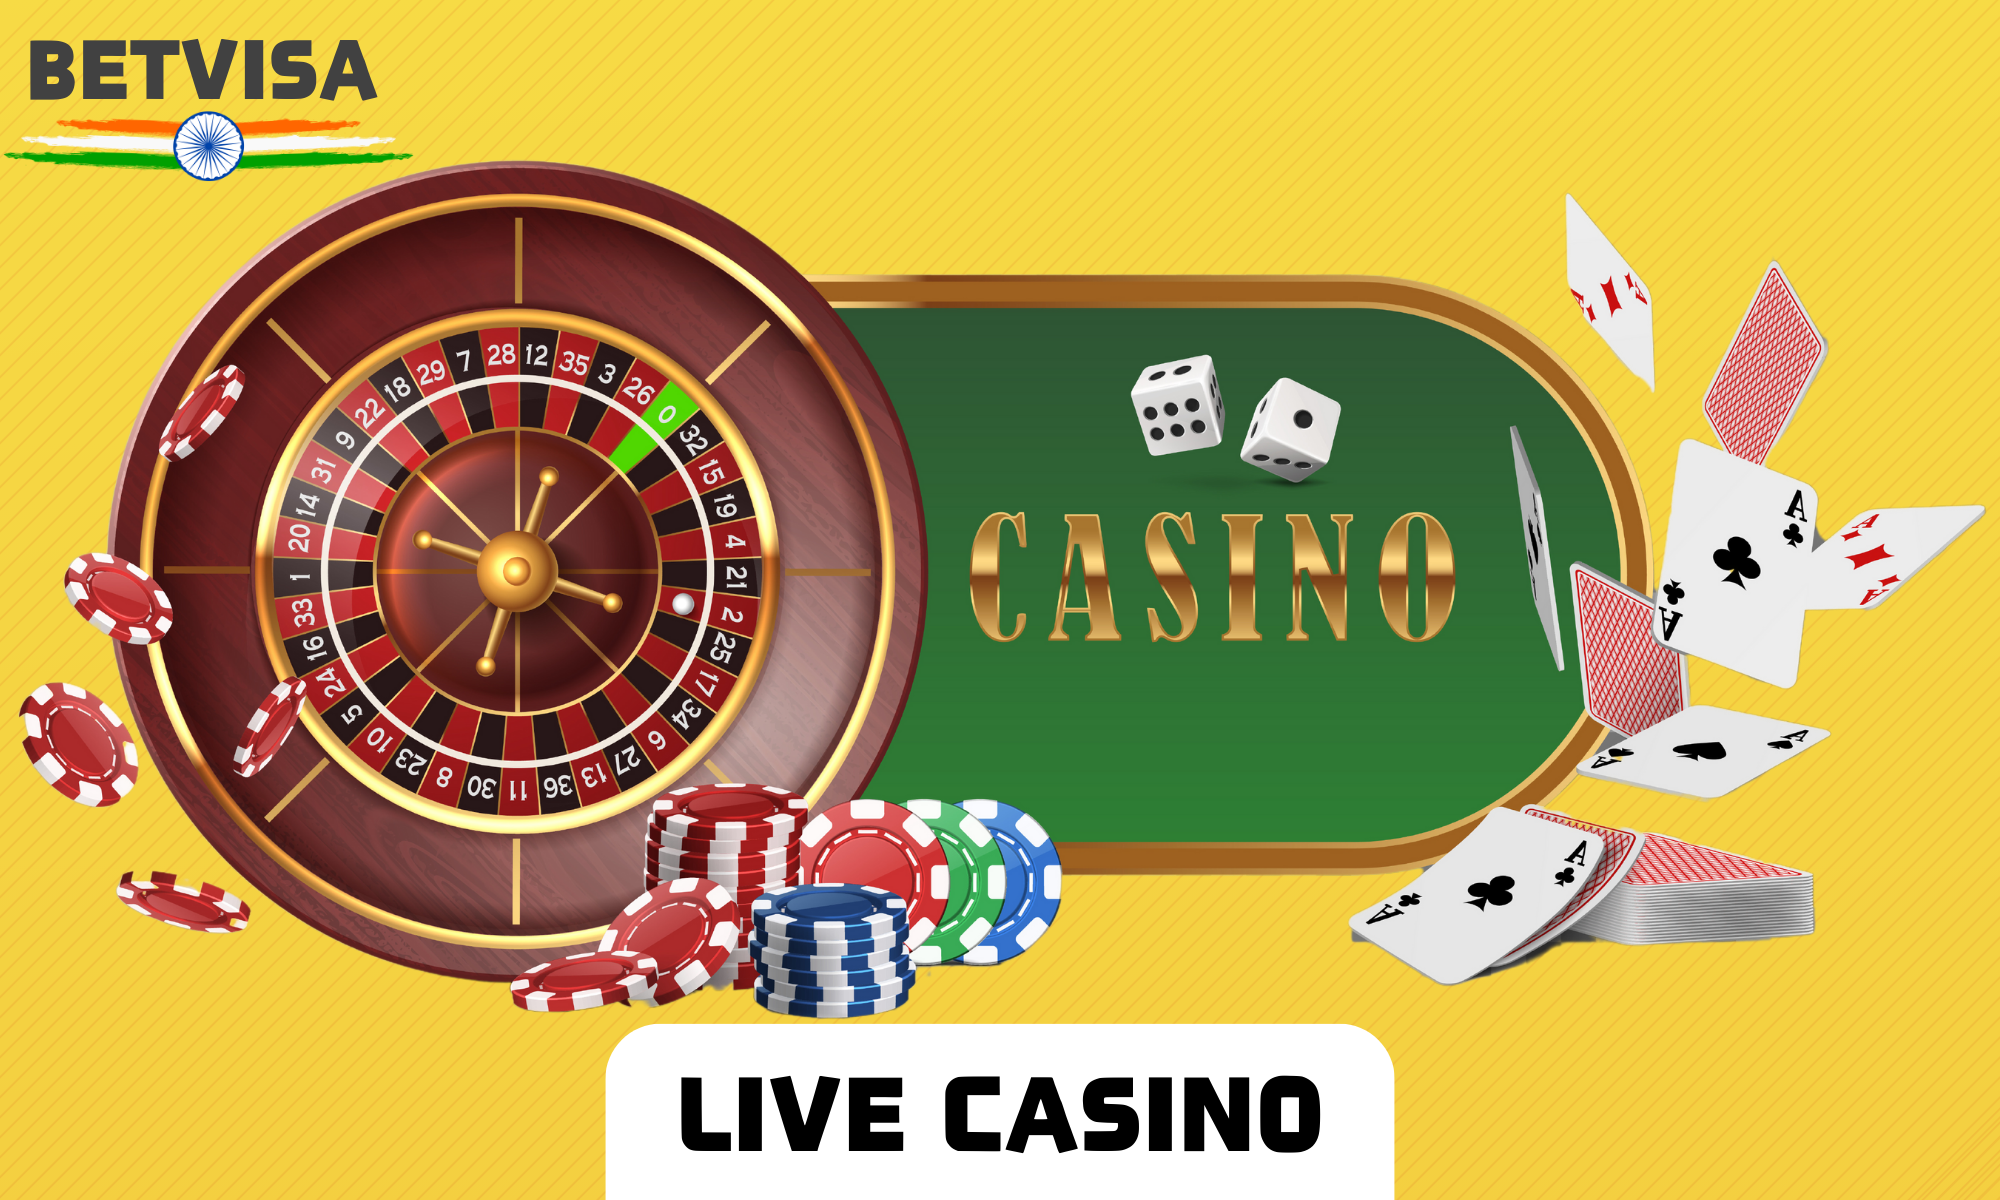 Live dealer games are available at Betvsa with a variety of bets